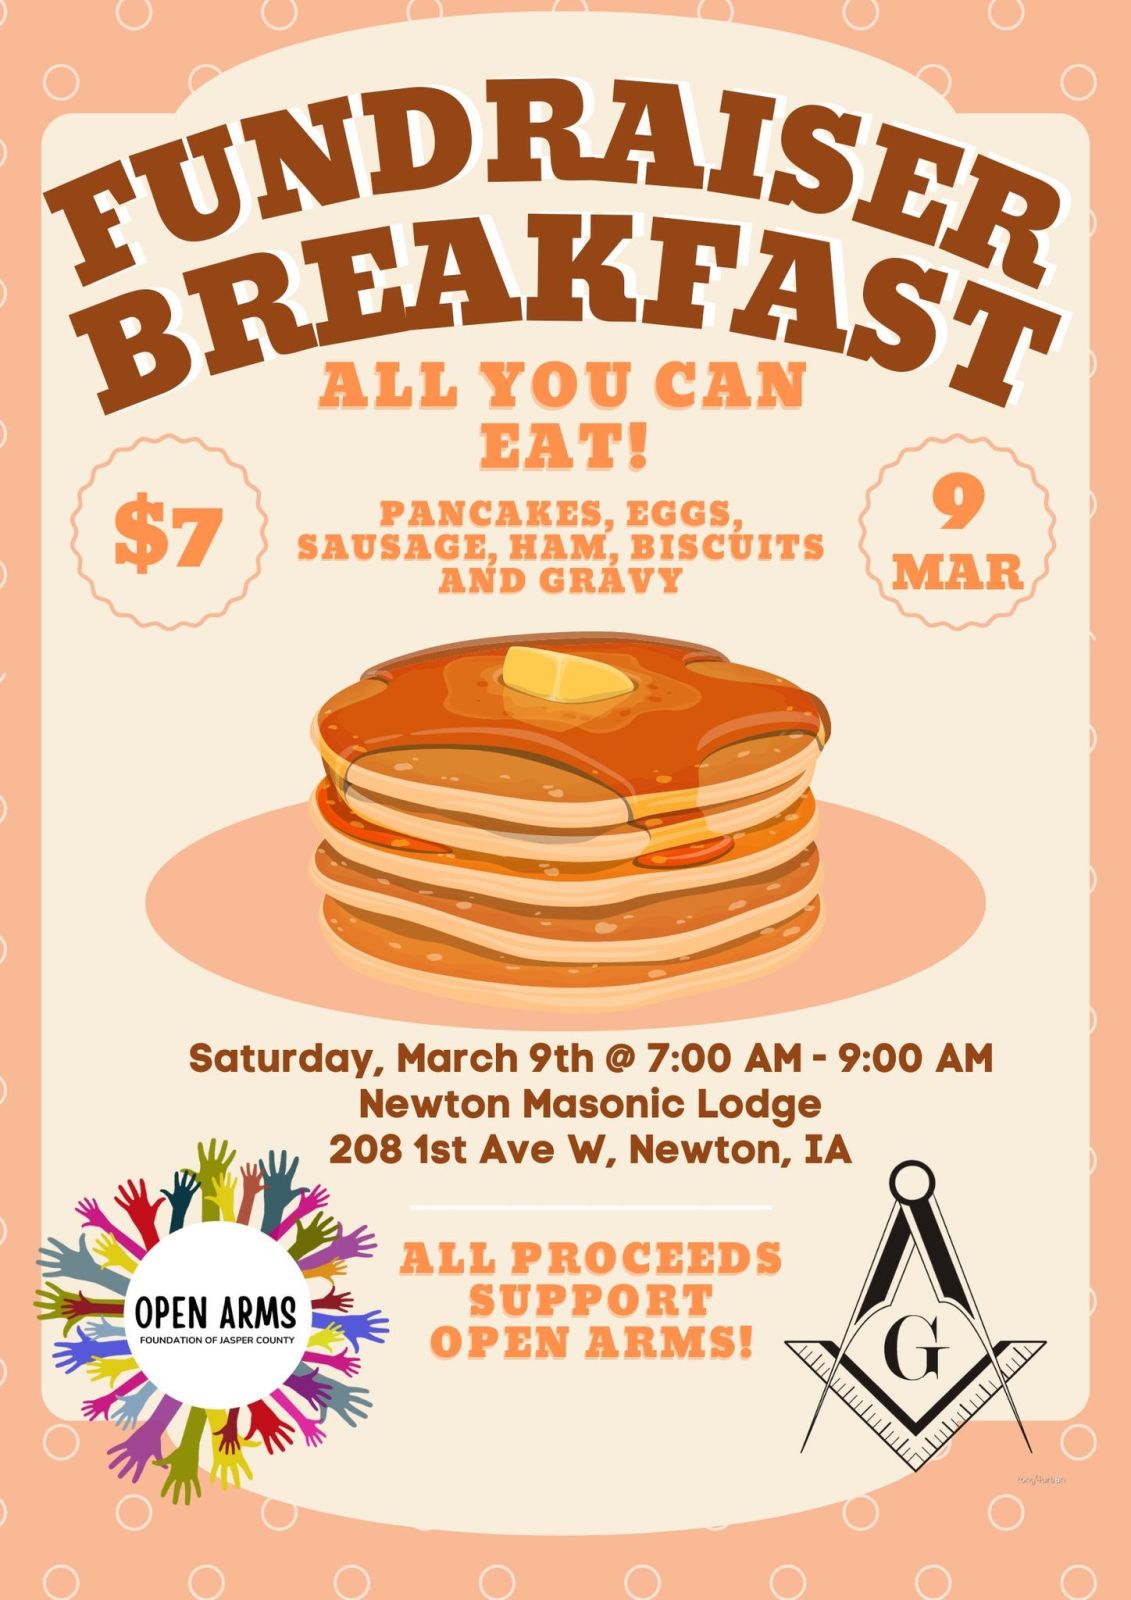 Open Arms Fundraiser Breakfast Photo - Click Here to See